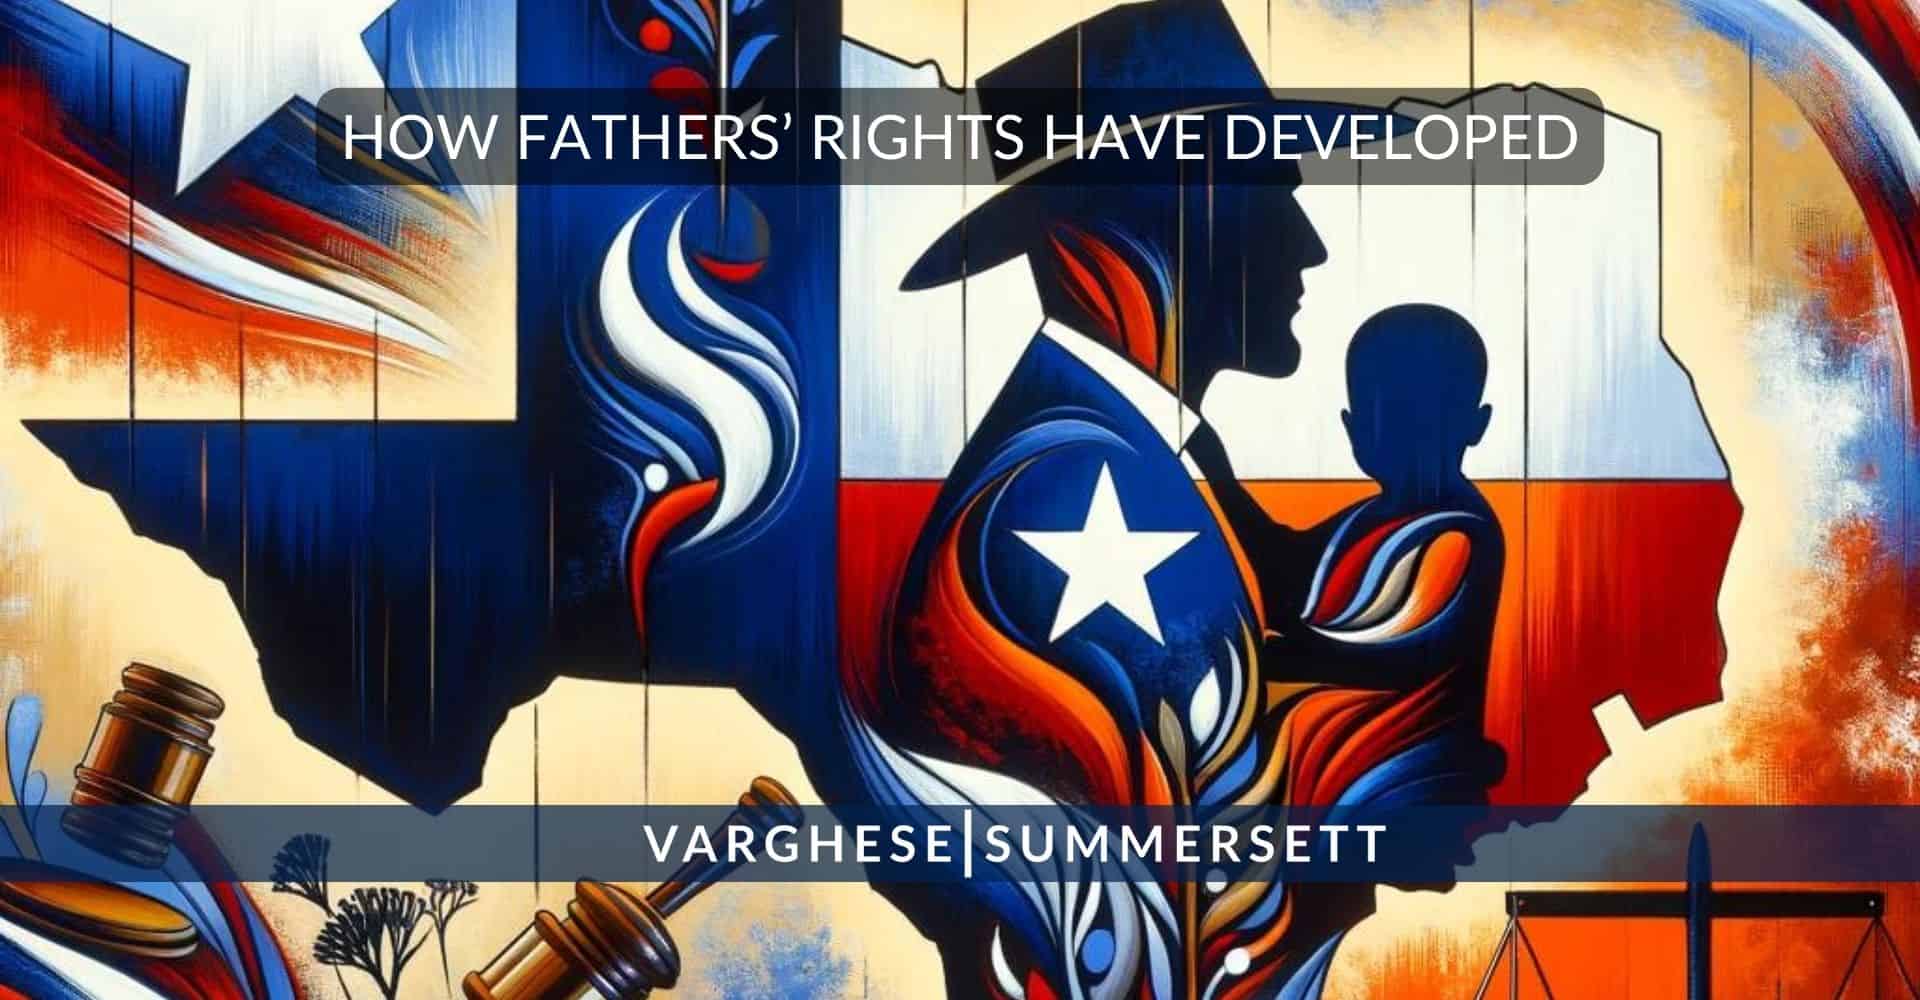 history of fathers rights